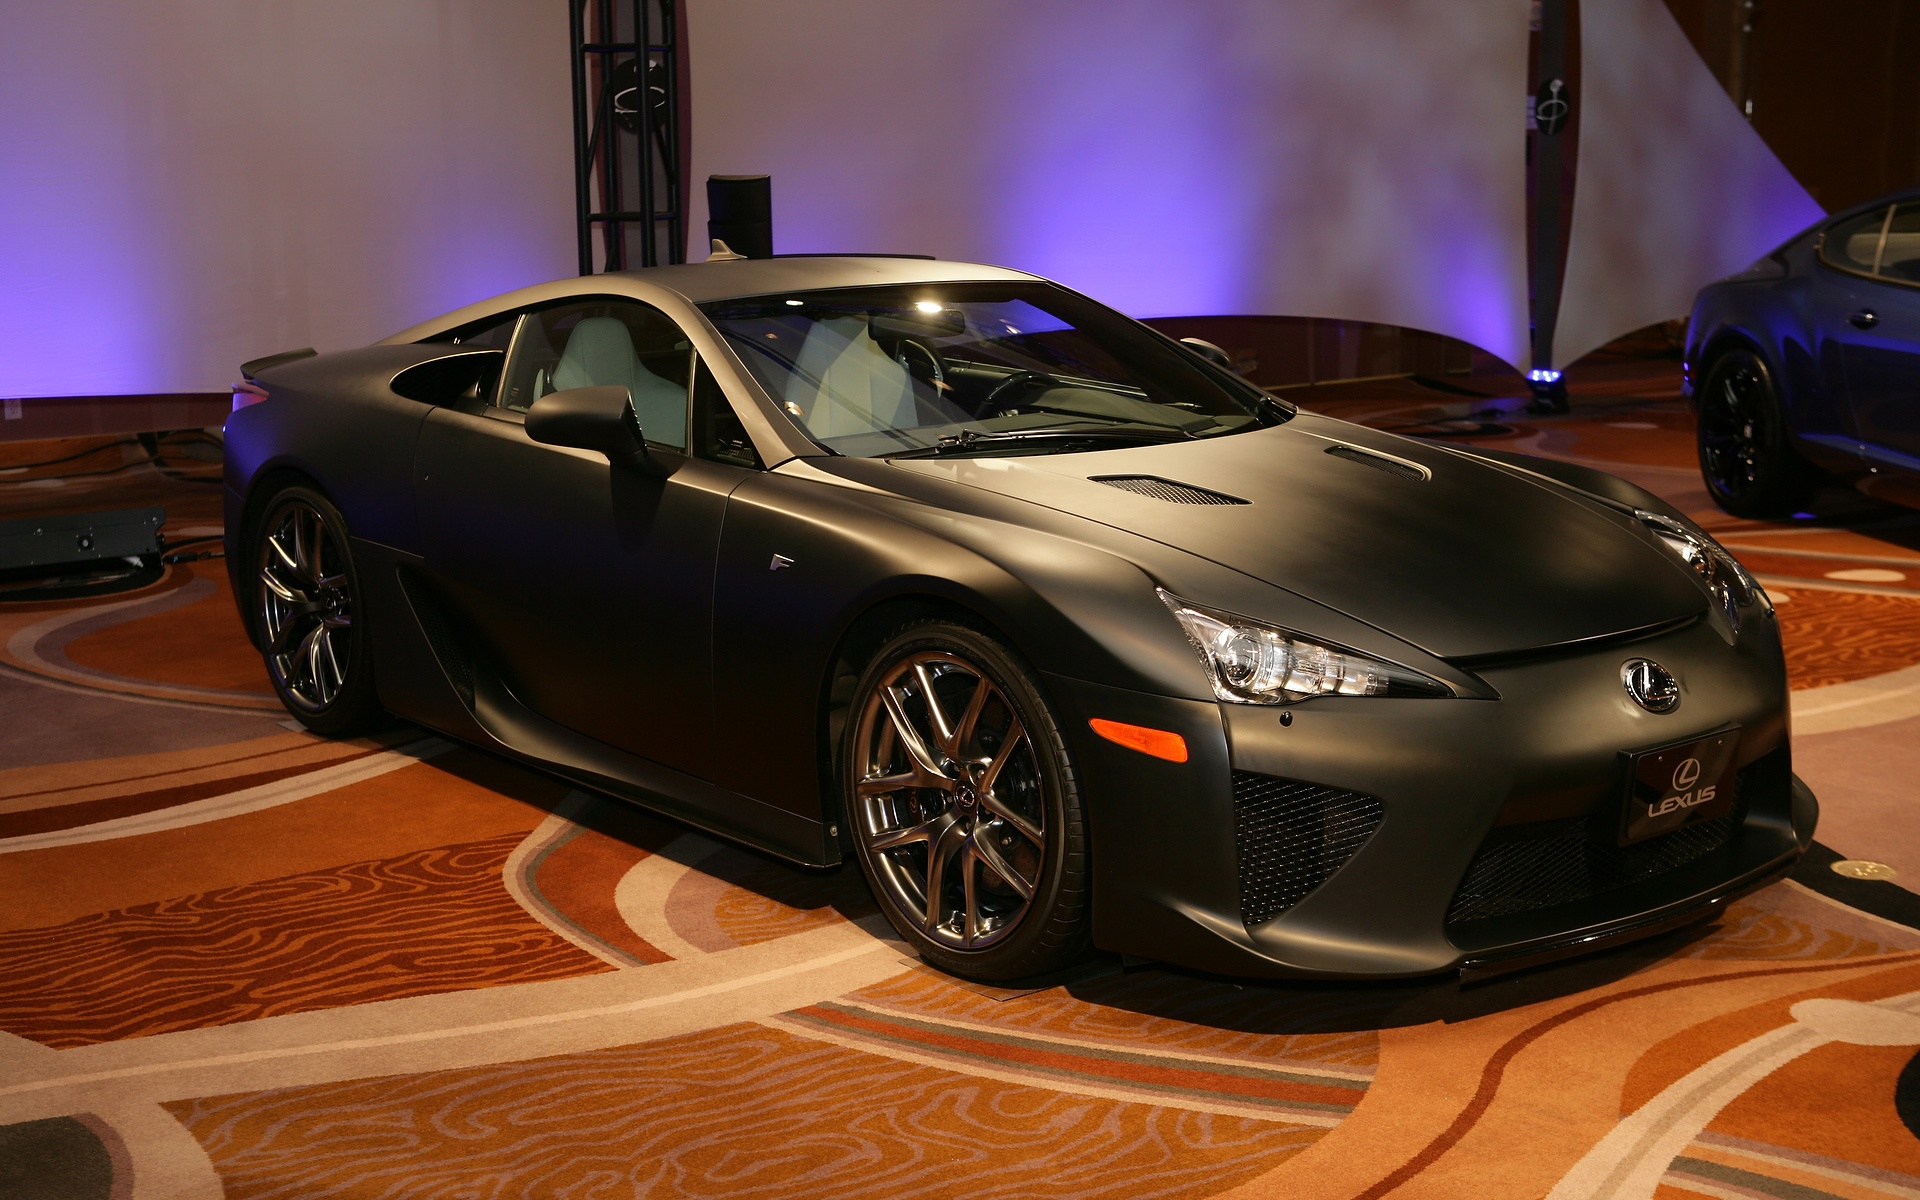 Lexus hd car Windows 8 wallpapers collection All for Windows 10 Free